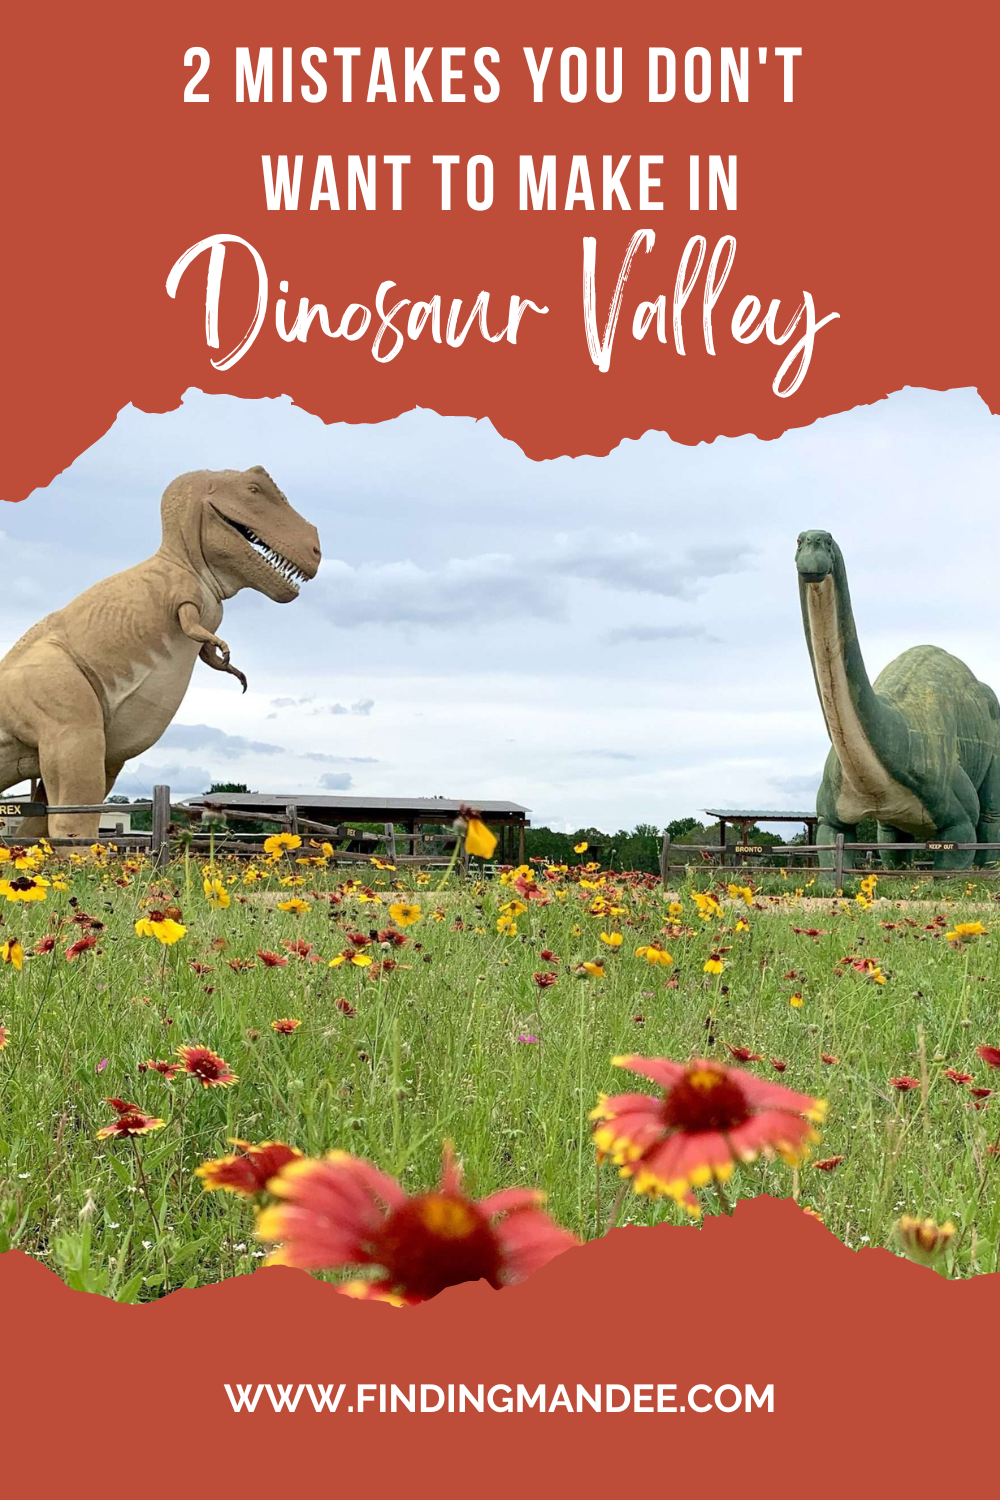 2 Mistakes You Don't Want to Make at Dinosaur Valley in Texas | Finding Mandee